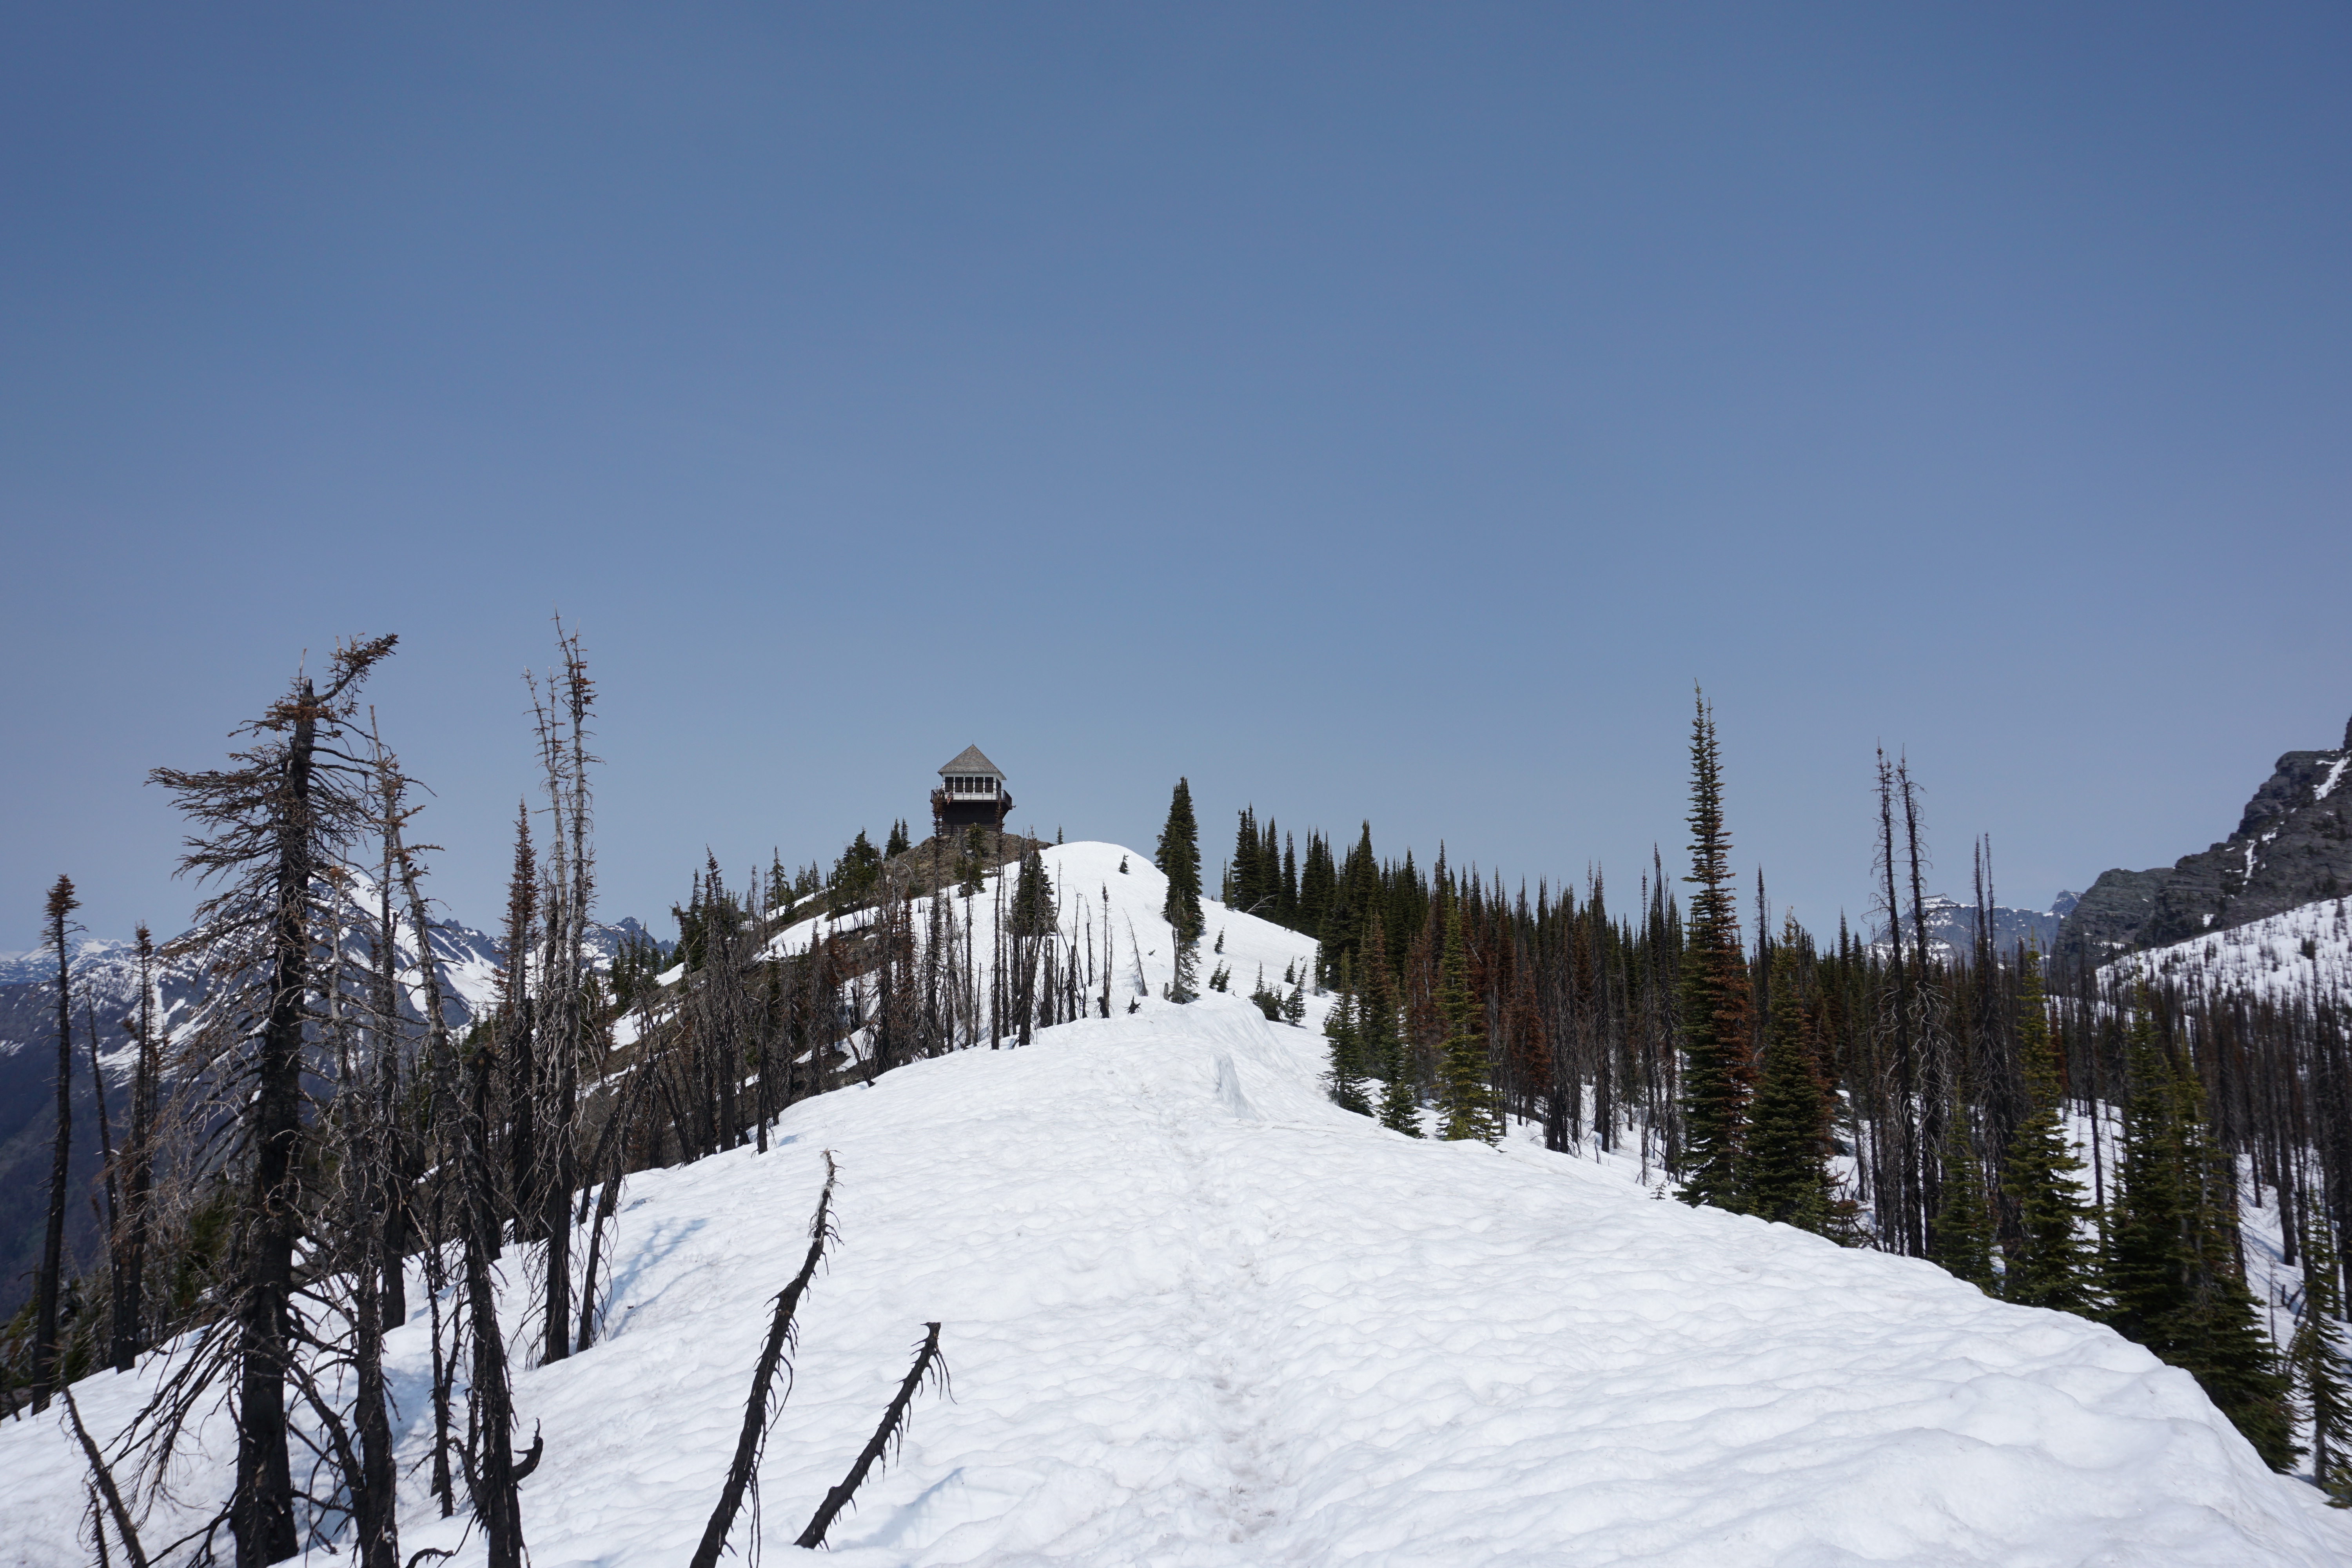 Snow and Mt Brown Fire-tower